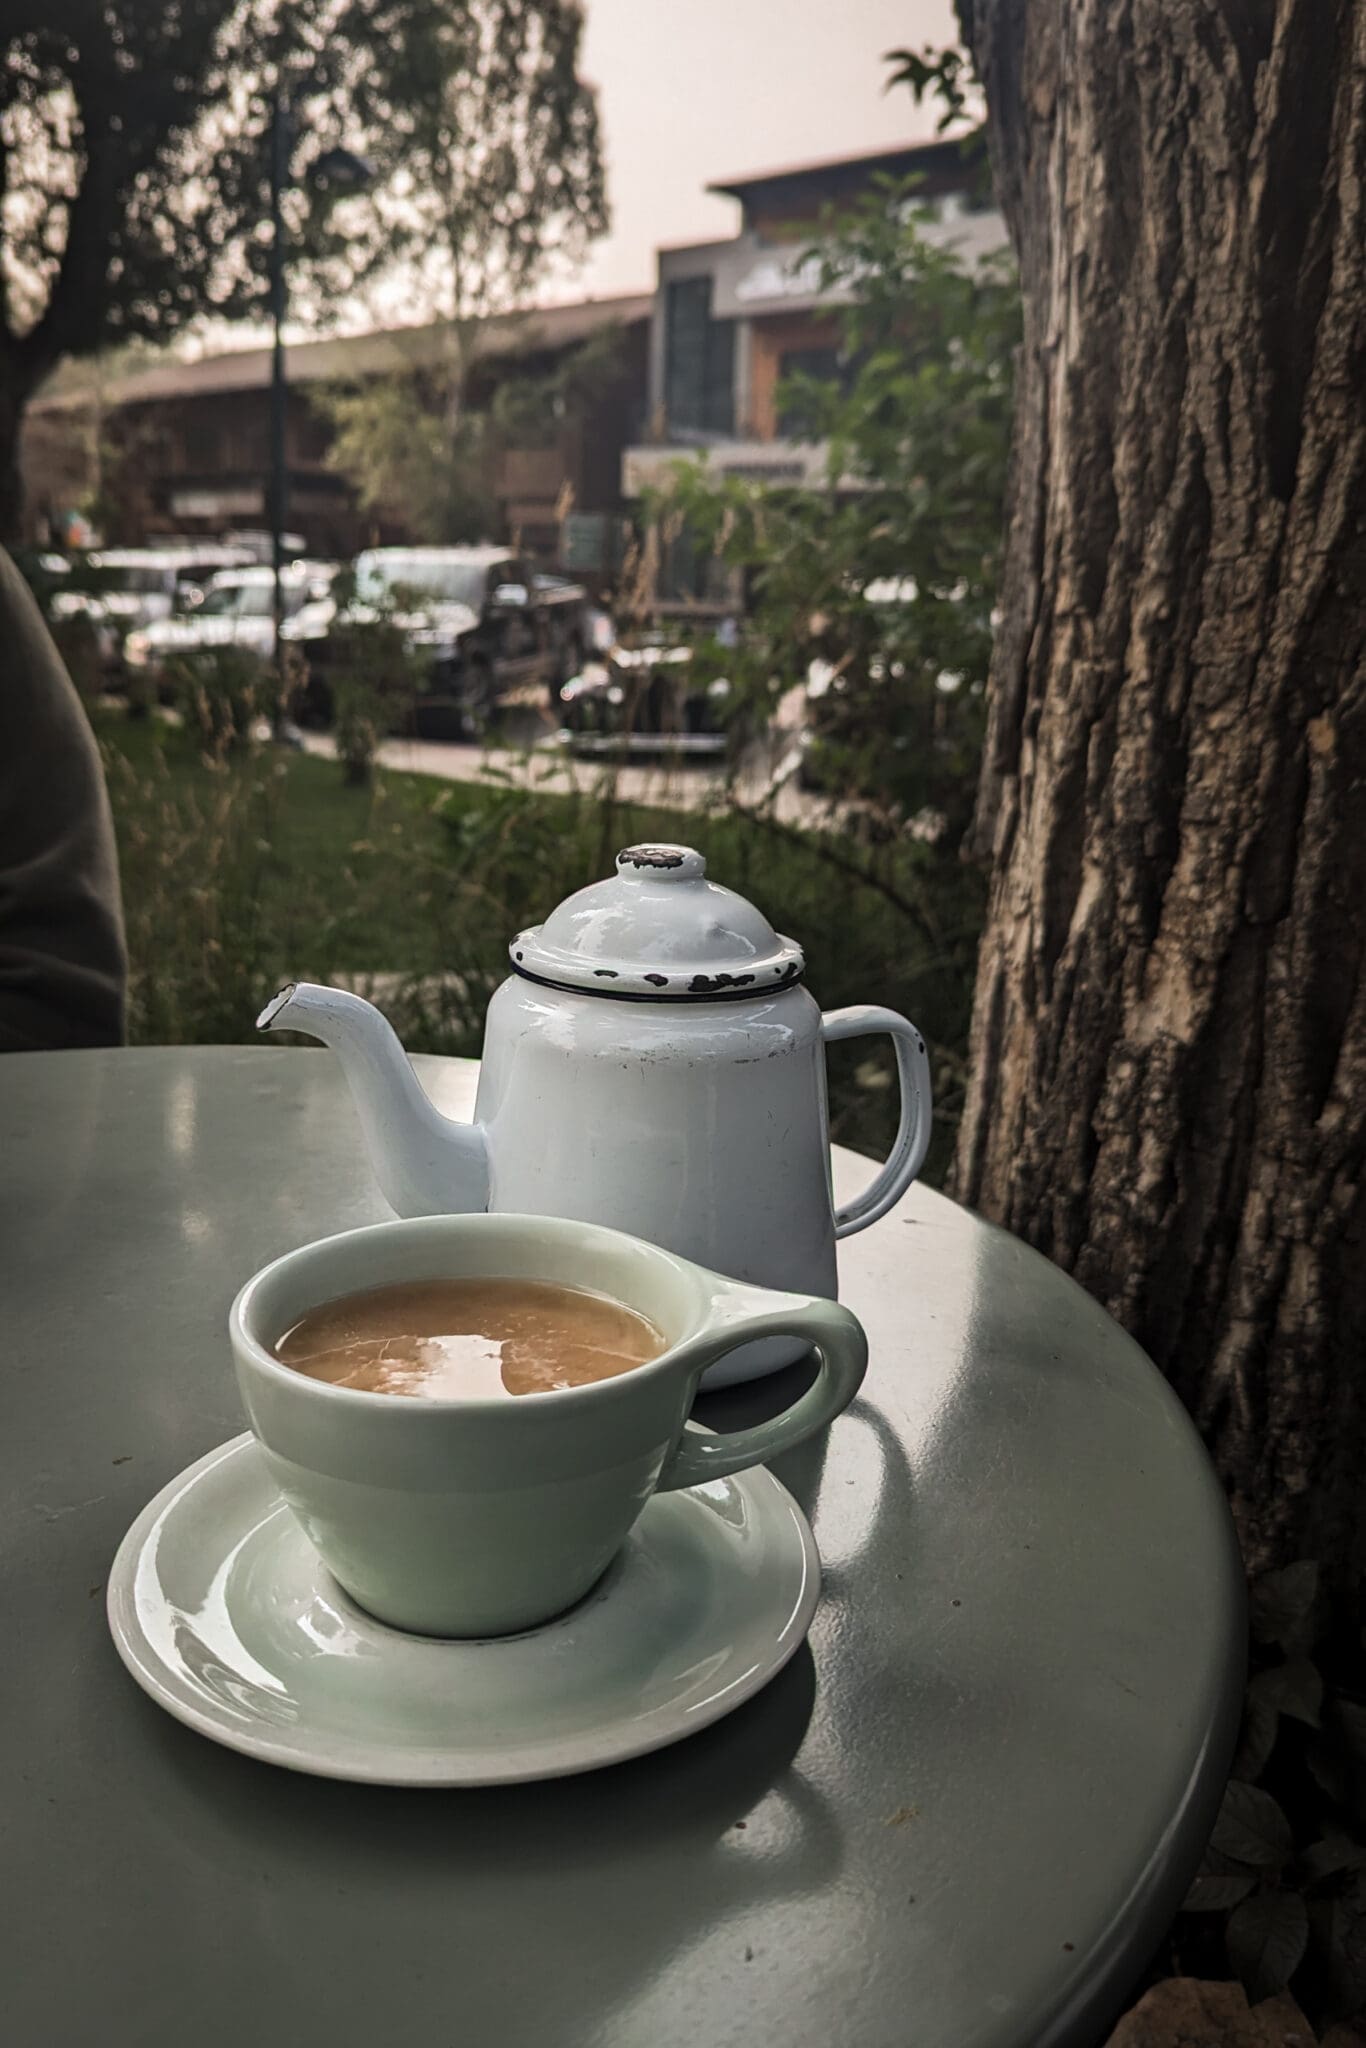 Cup of tea on a table in front of a tree